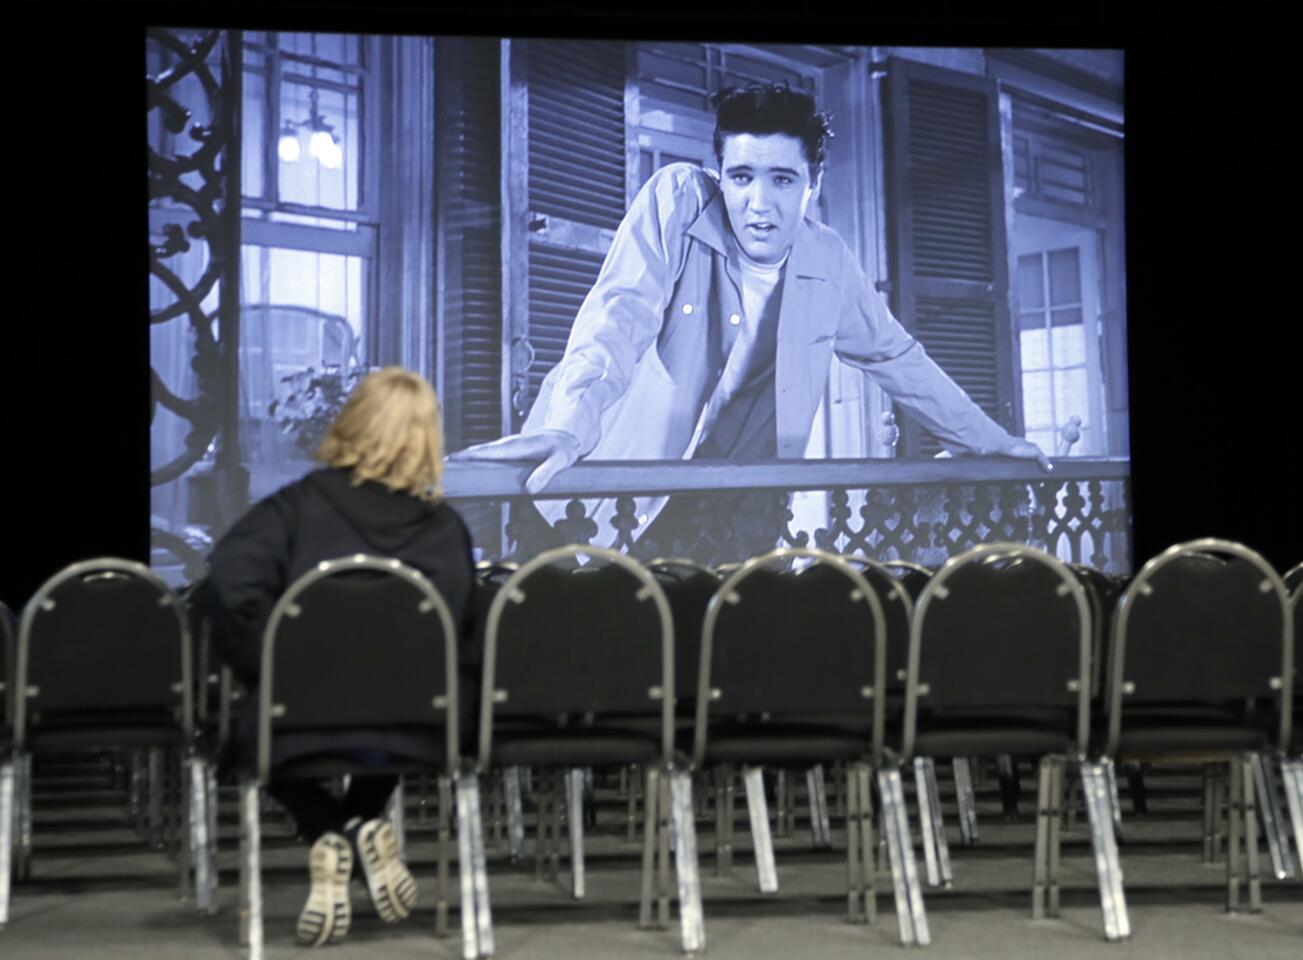 A woman watches the Elvis Presley film "King Creole" in a theater in the "Elvis Presley's Memphis" c